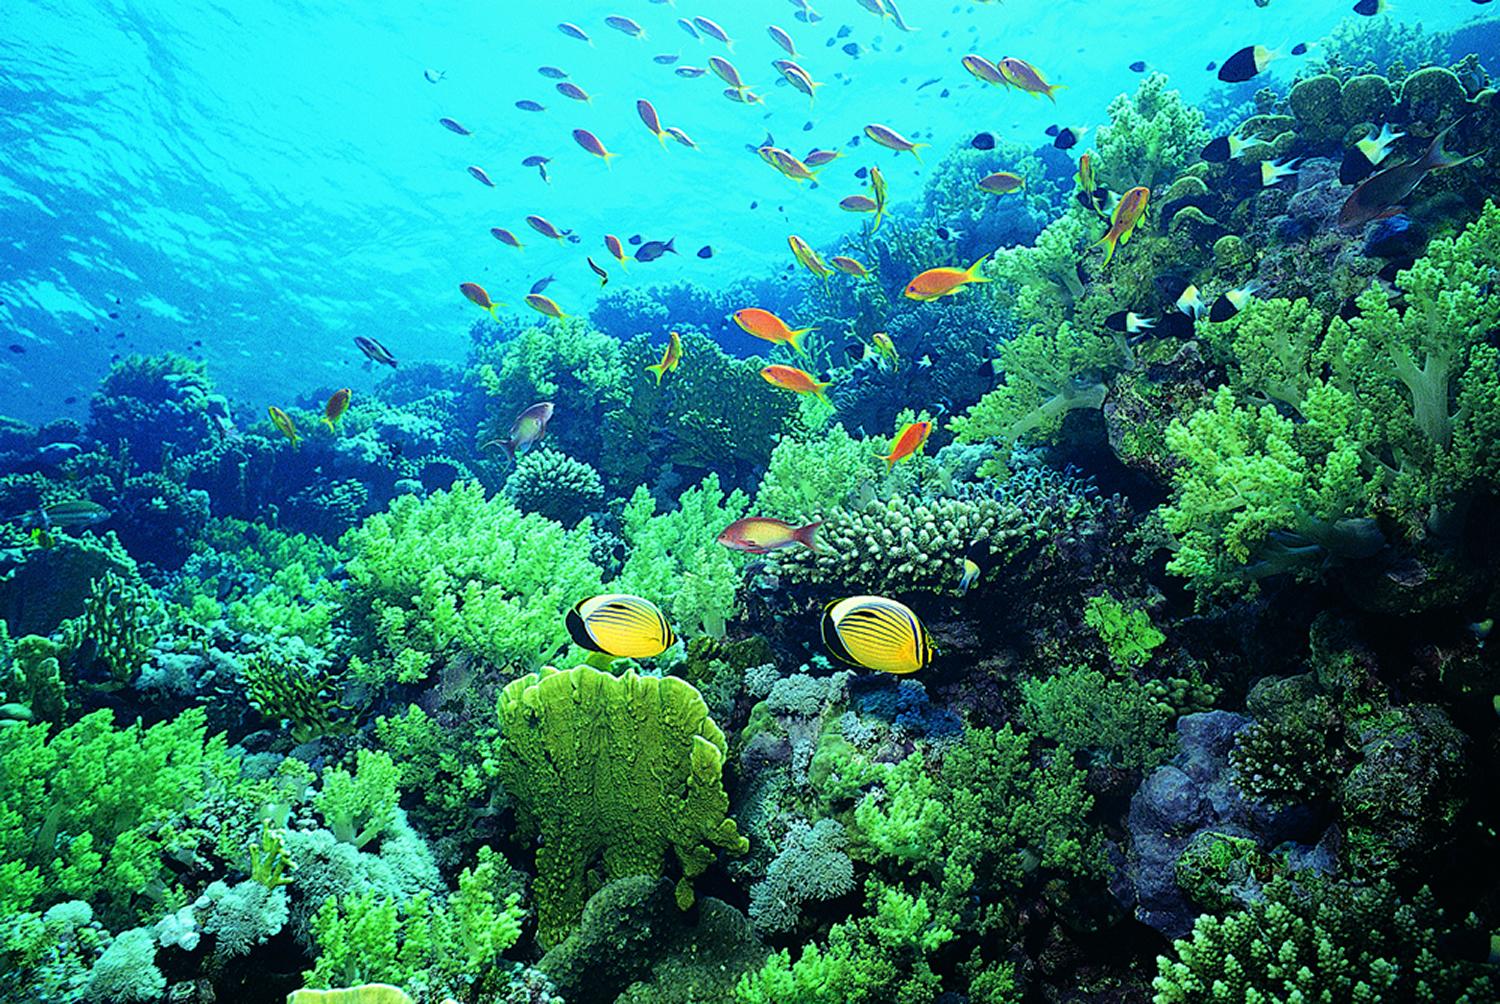 Coral reef ecosystem